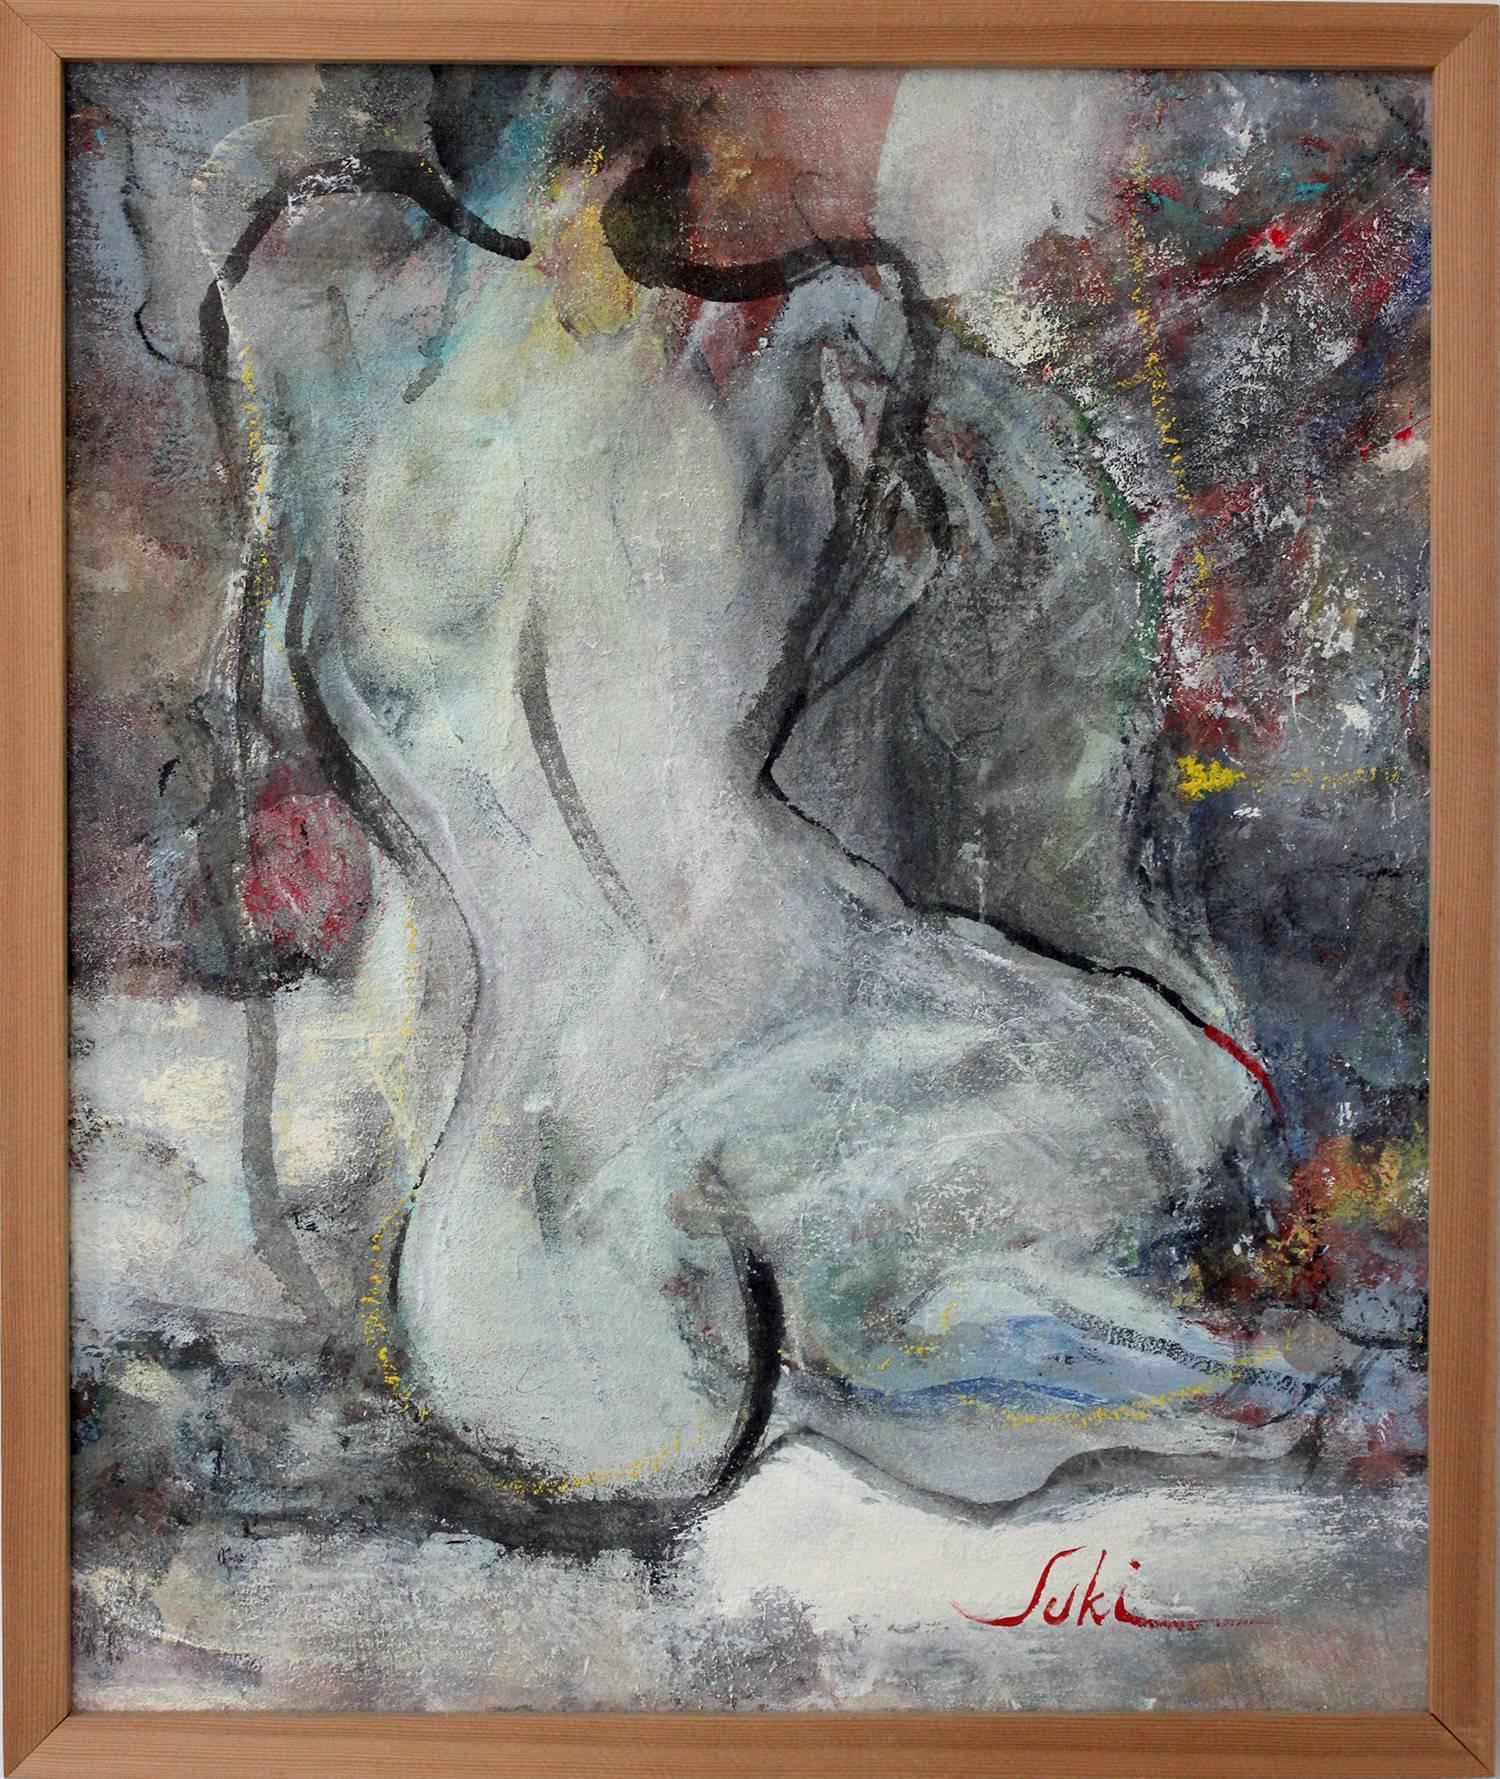 Suki Maguire Nude Painting - "Work 22 (Nude)" Abstract Nude Figure Expressionist Acrylic on Canvas Painting